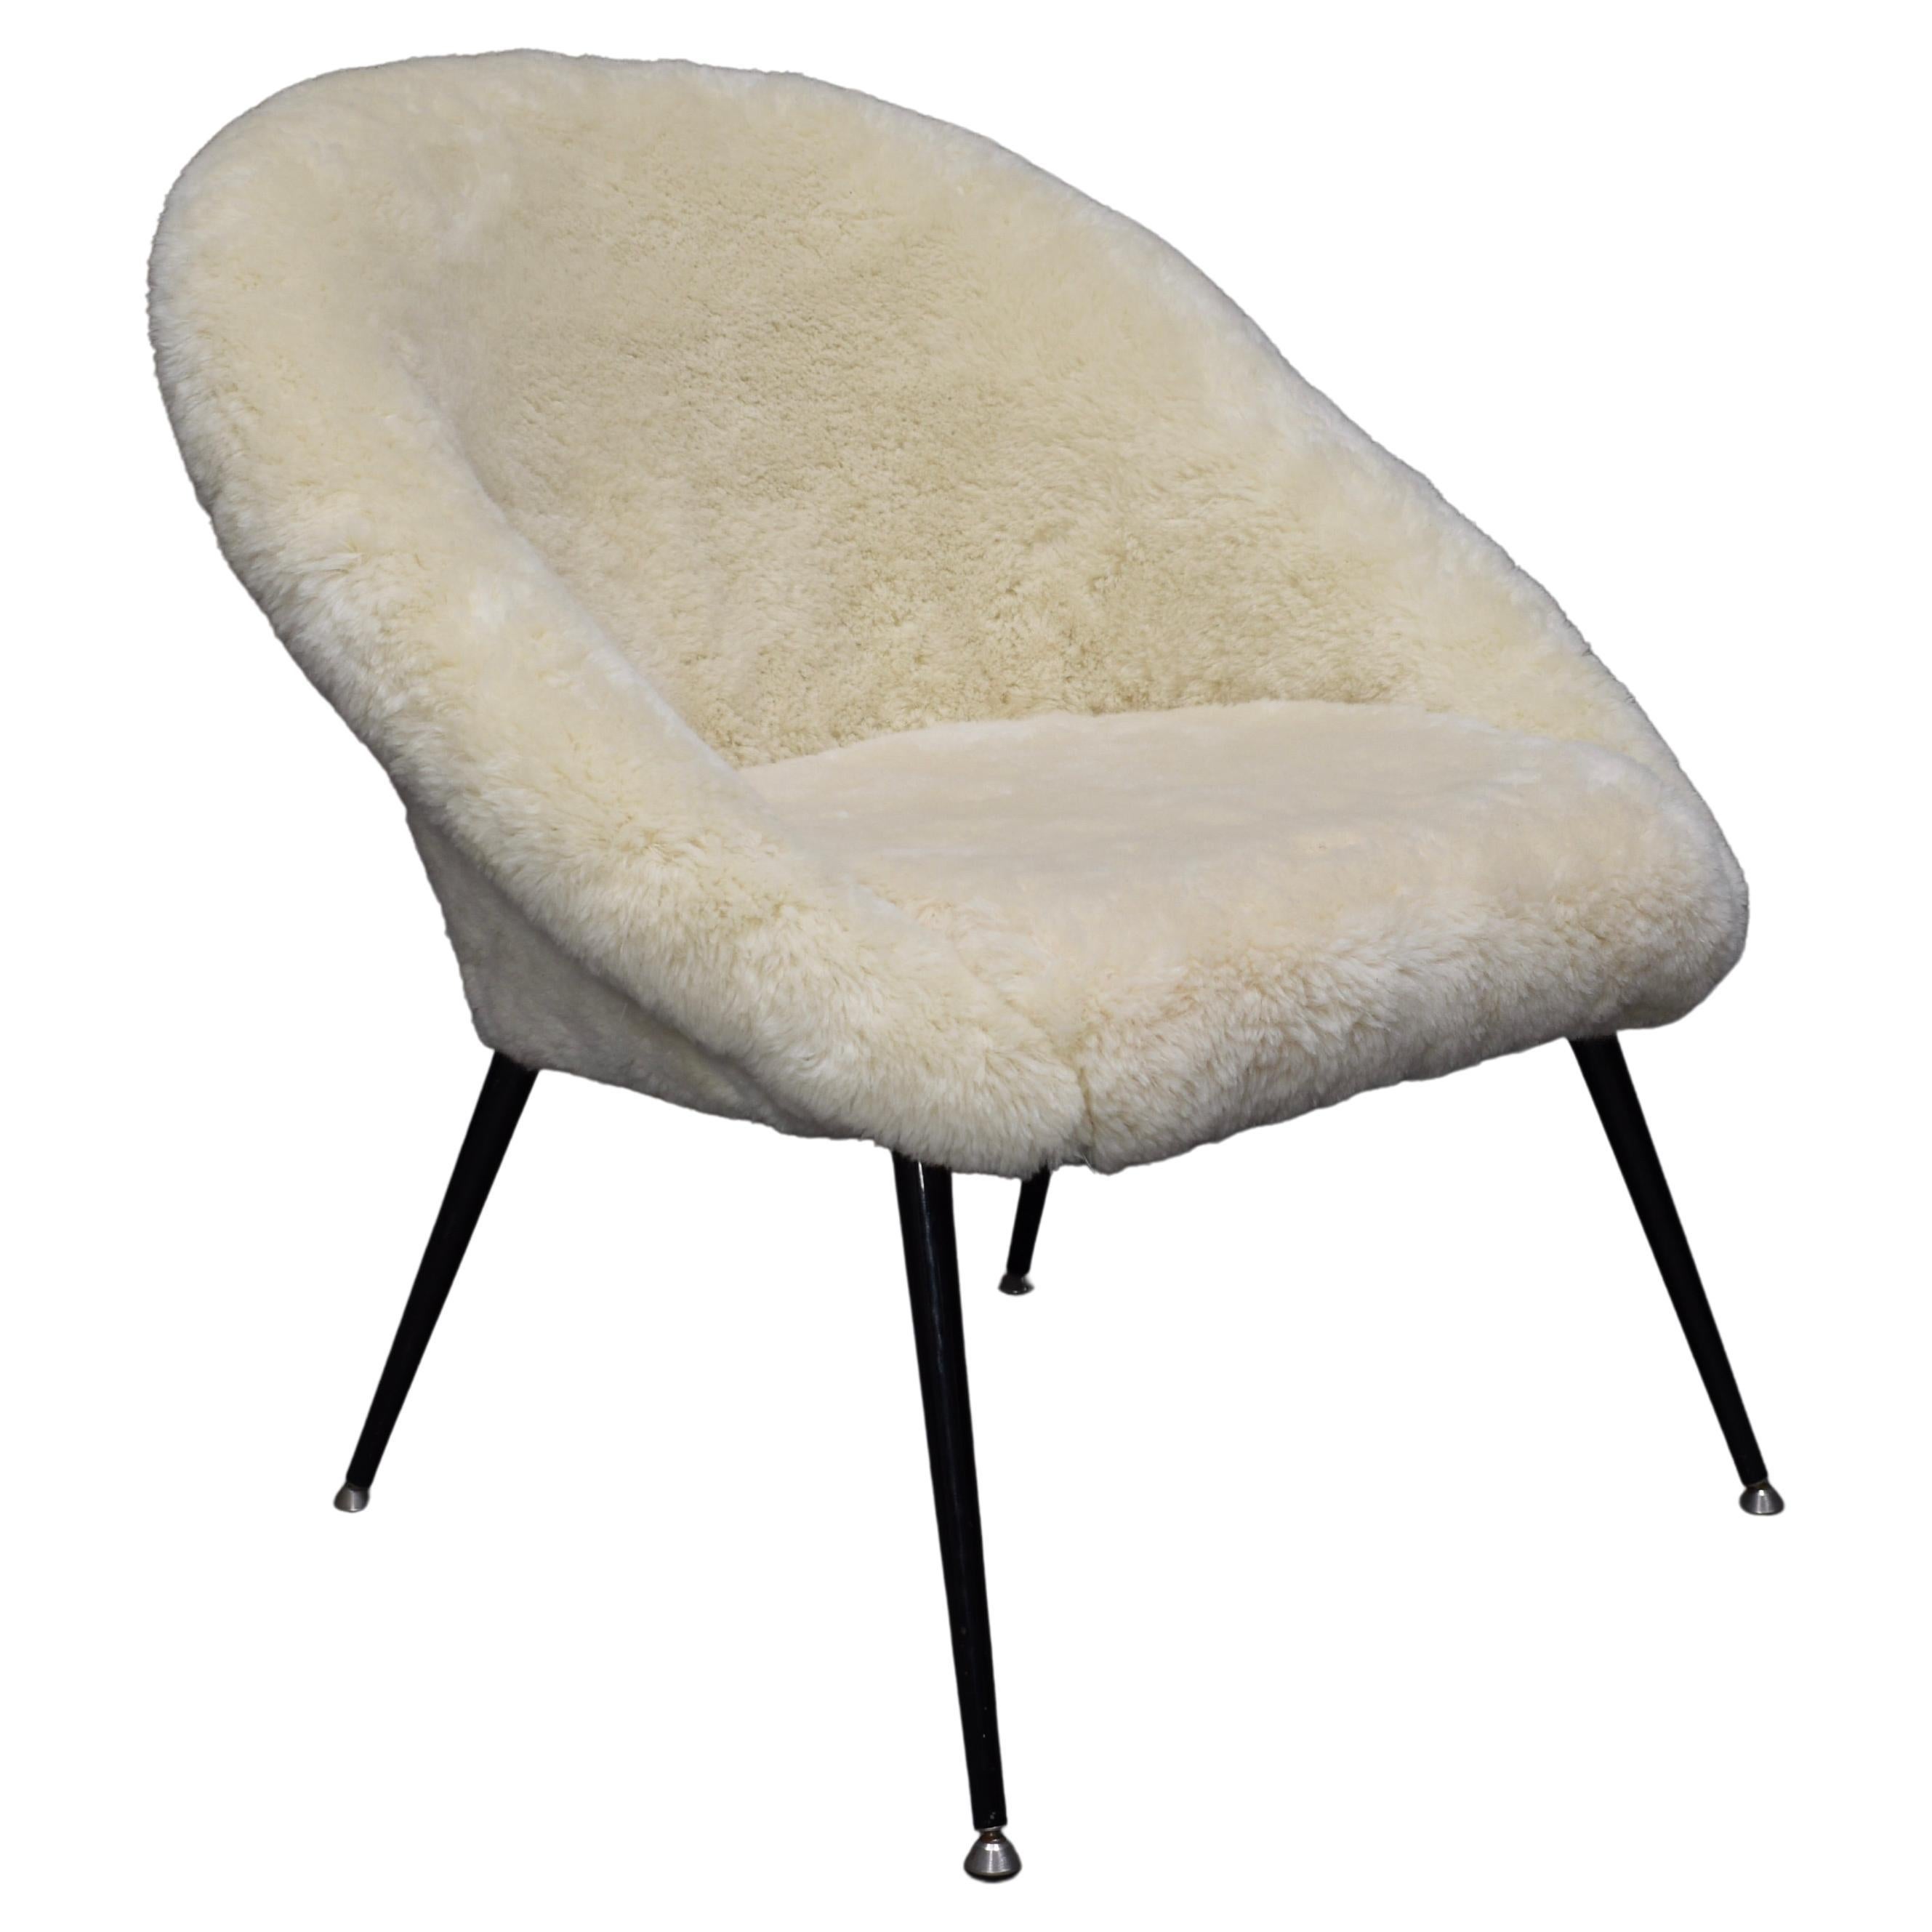 Elegant armchair new upholstered in thick Sheep wool.
We have three chairs available.
The chair is labeled August 3d 1970.
The legs are made of black lacquered steel with chrome feet. 

Designer: in the manor of Fritz Neth
Manufacturer: